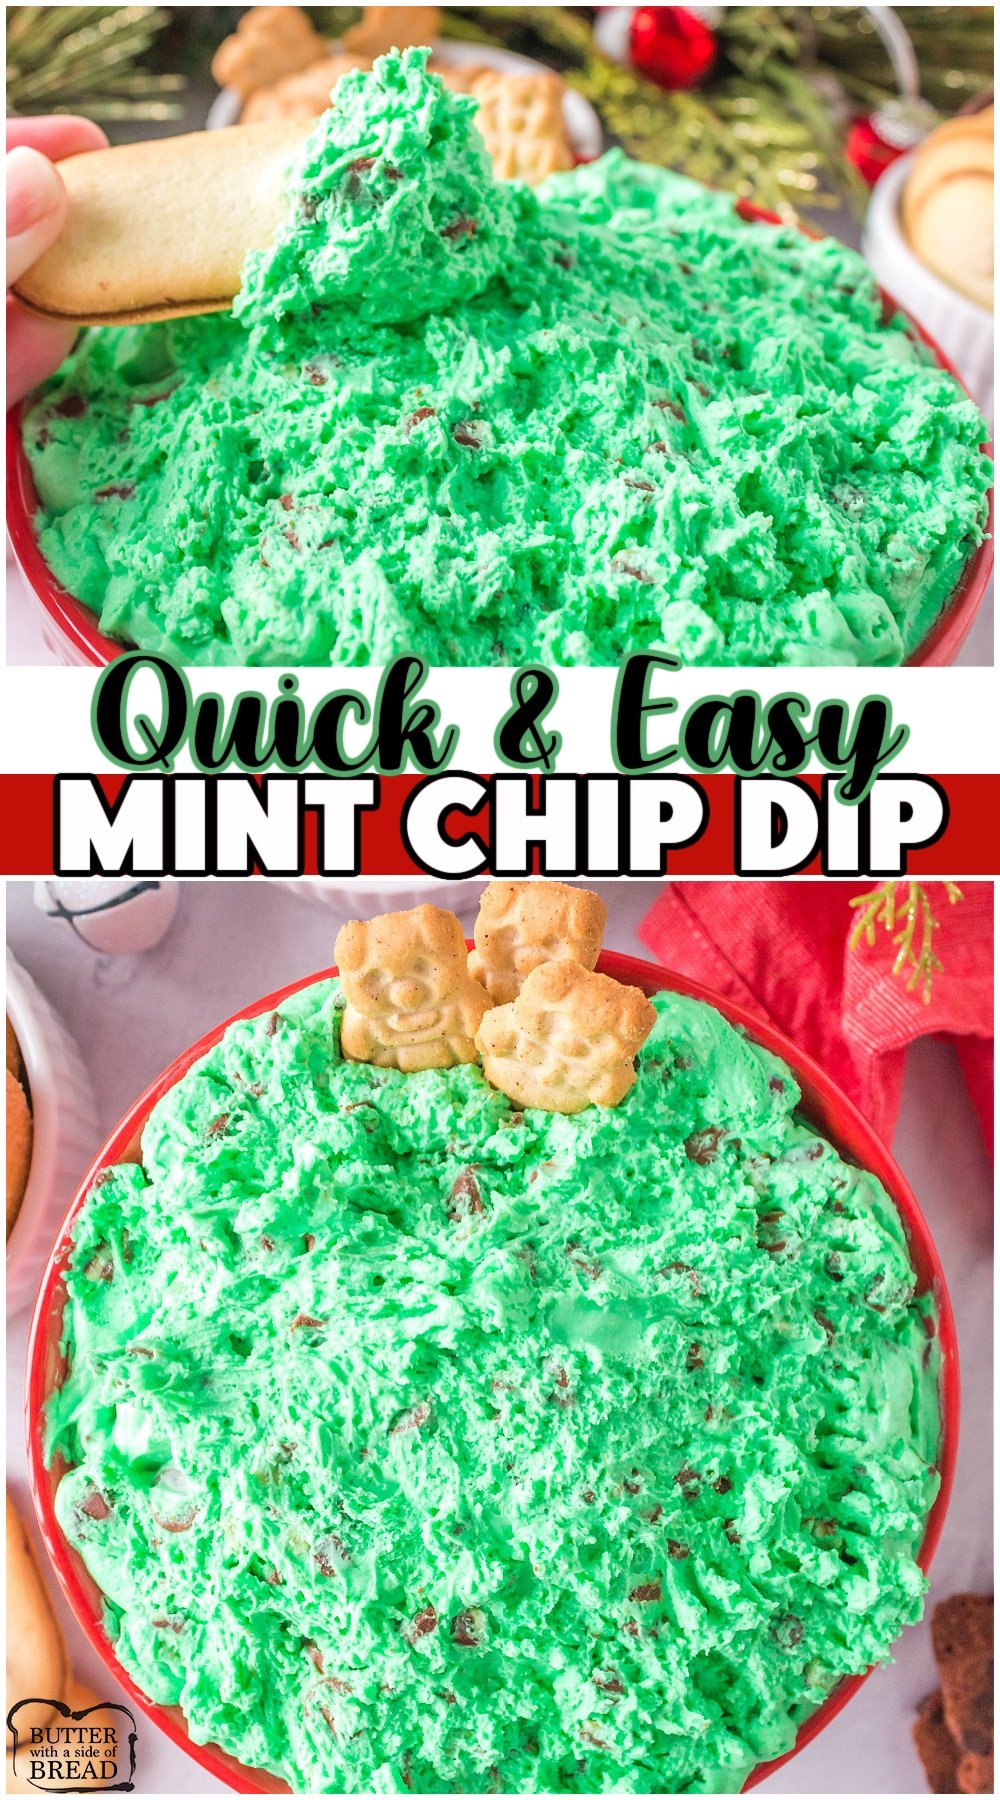 Dessert Mint Chip Dip made easy in minutes & so fun and festive! Perfect dessert dip for Christmas as it's best served with a variety of cookies. Mint chip lovers go crazy for this dip! 